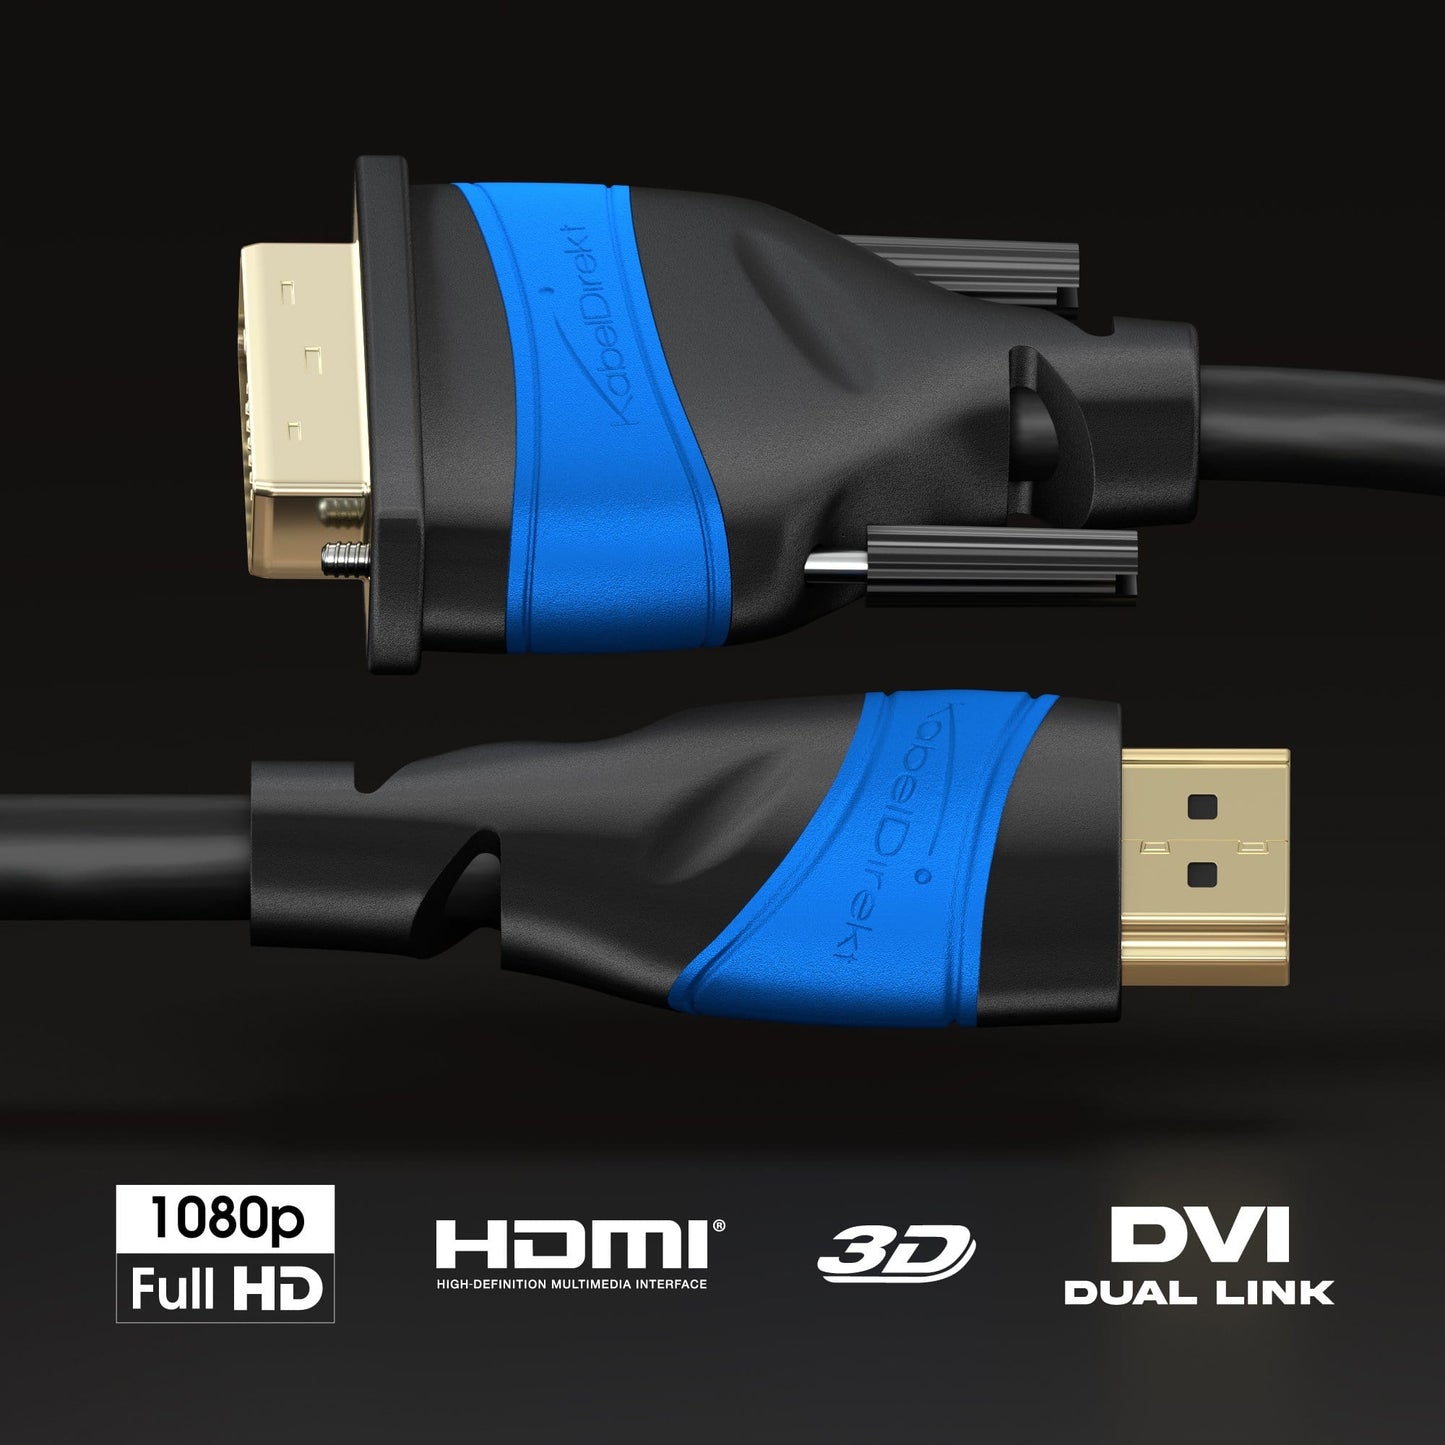 HDMI-DVI adapter cable – bi-directional, DVI-D 24+1/High Speed HDMI cable, 1080p/Full HD, digital video cable, connect HDMI devices to DVI monitors or vice-versa, black